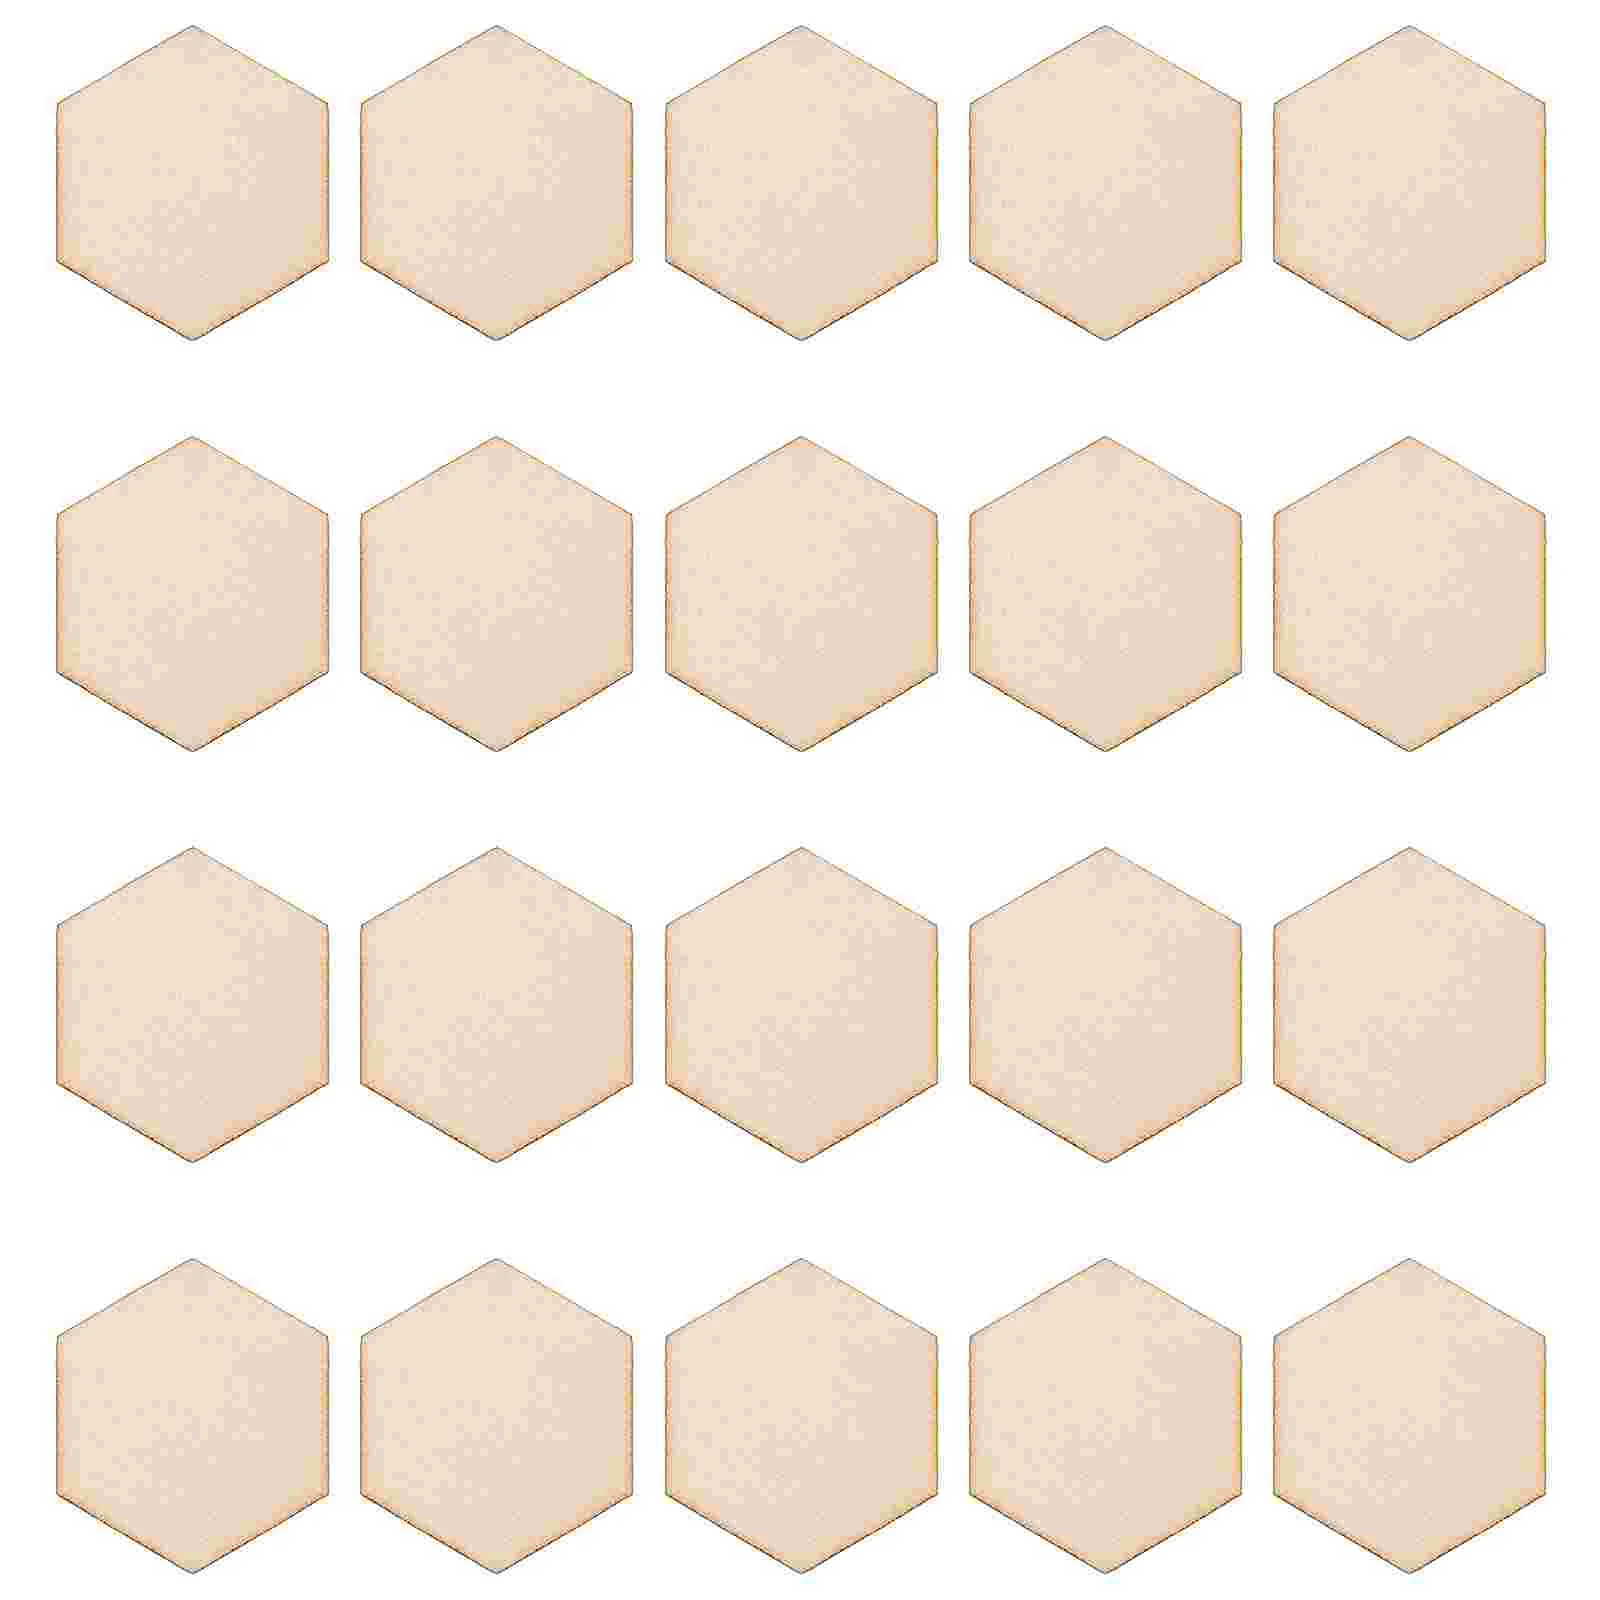 

25mm Hexagonal Wood Chips Centerpieces Rustic Wood Woodsy Decor Hexagon Cutouts Blank Ornaments Wooden Unfinished Woods Slices